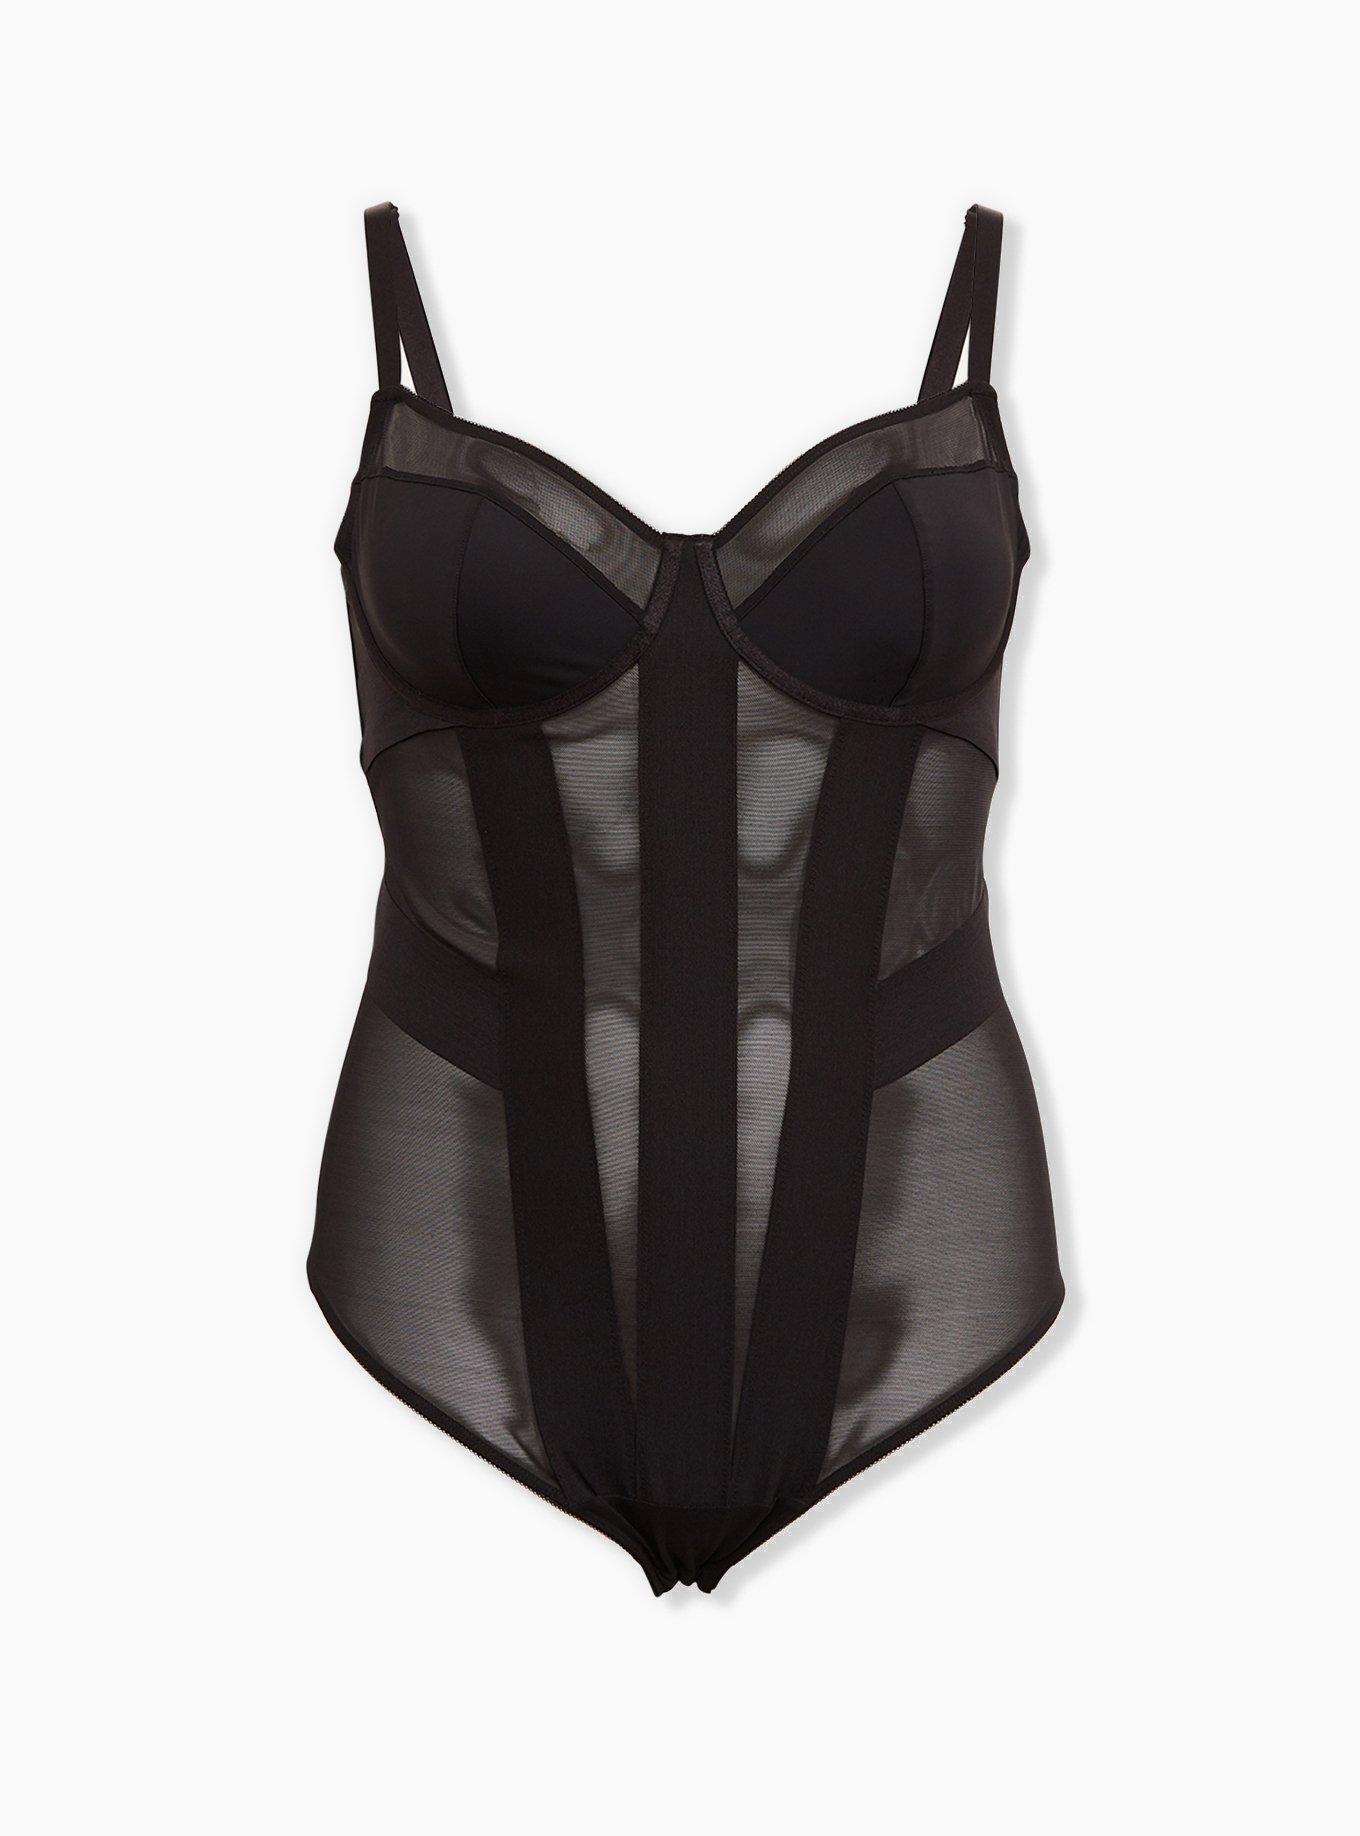 Sheer, Strappy Camisoles -- Are They a Don't?